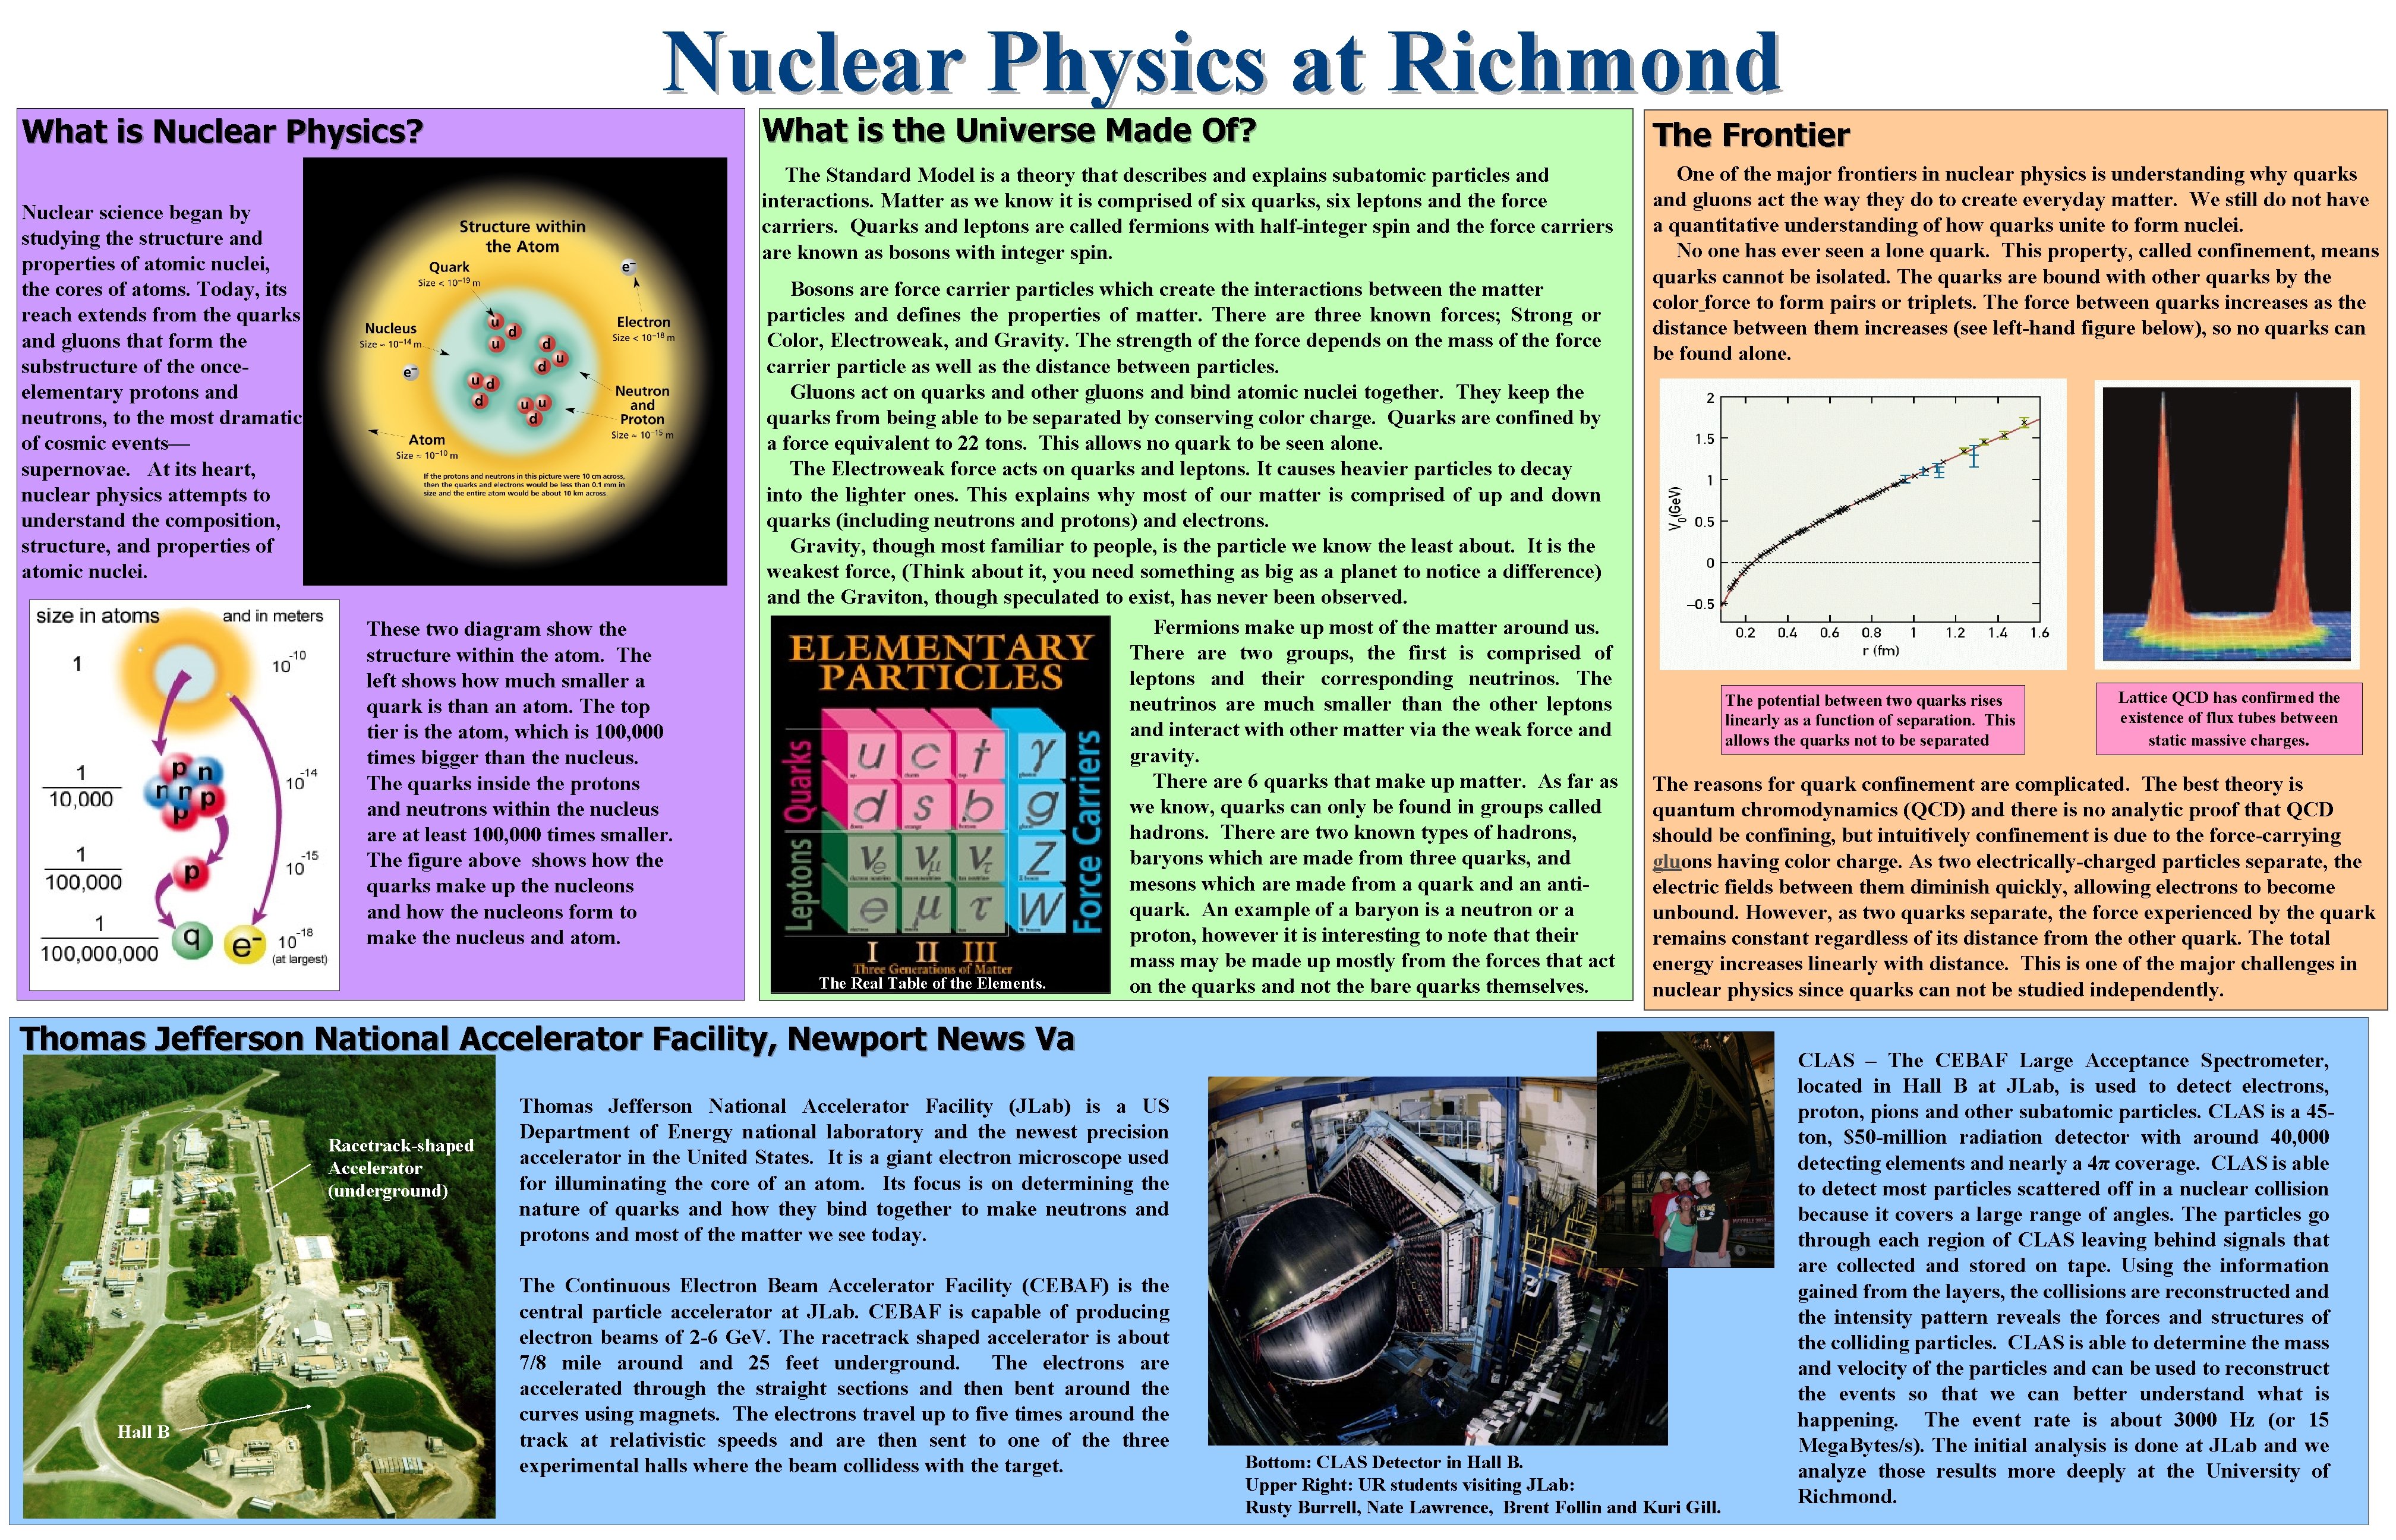 What is Nuclear Physics? Nuclear Physics at Richmond Nuclear science began by studying the